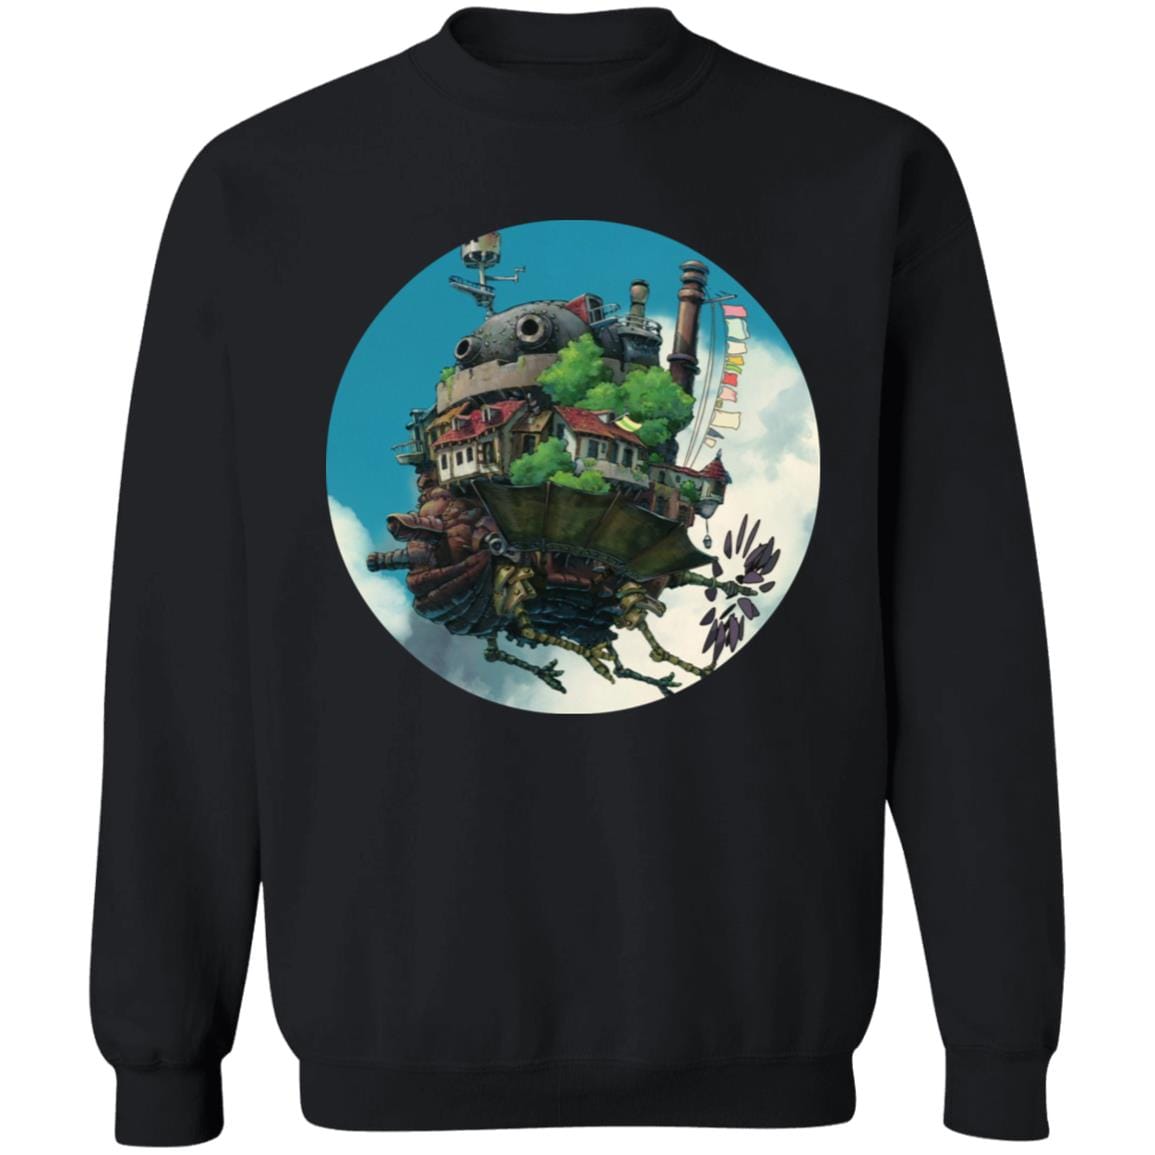 Howl’s Moving Castle – Flying on the Sky Sweatshirt